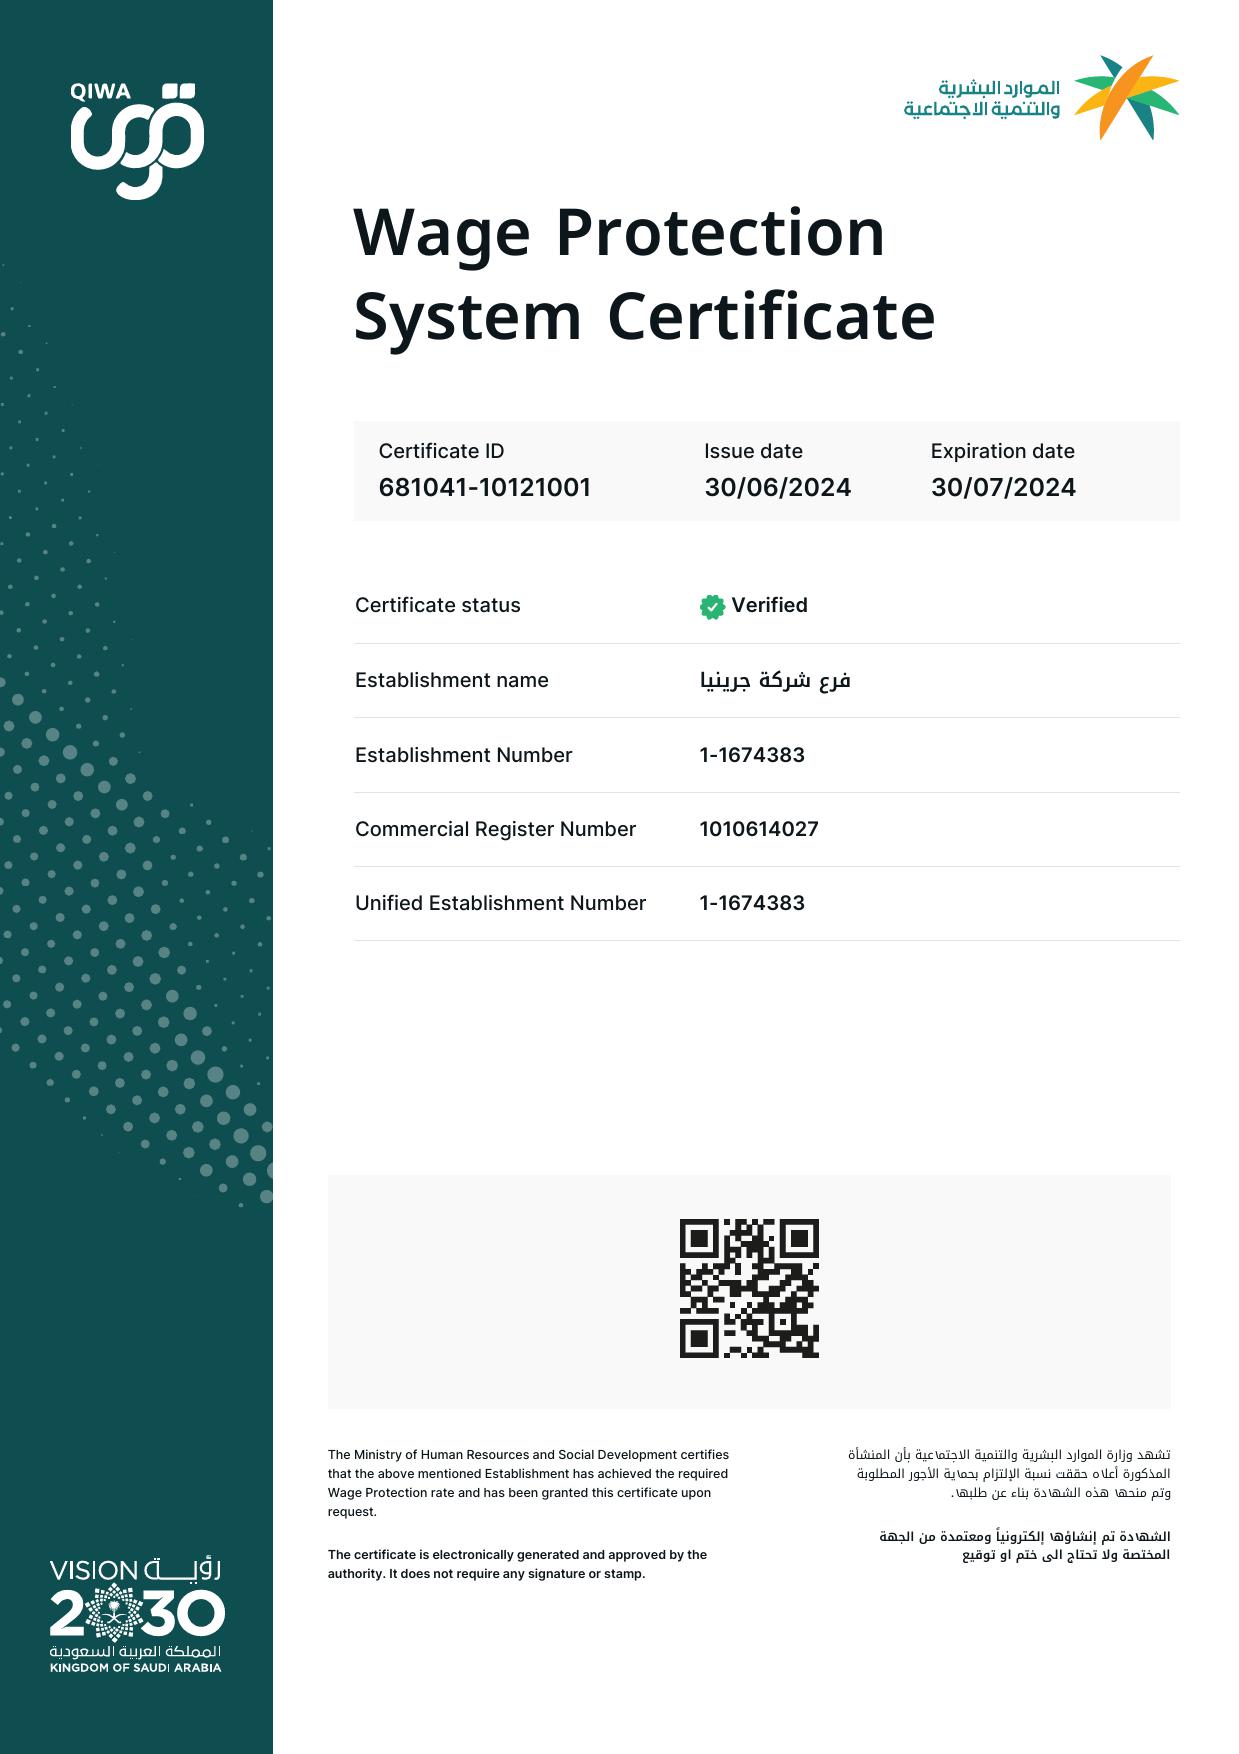 Wage Protection System Certificate (1)